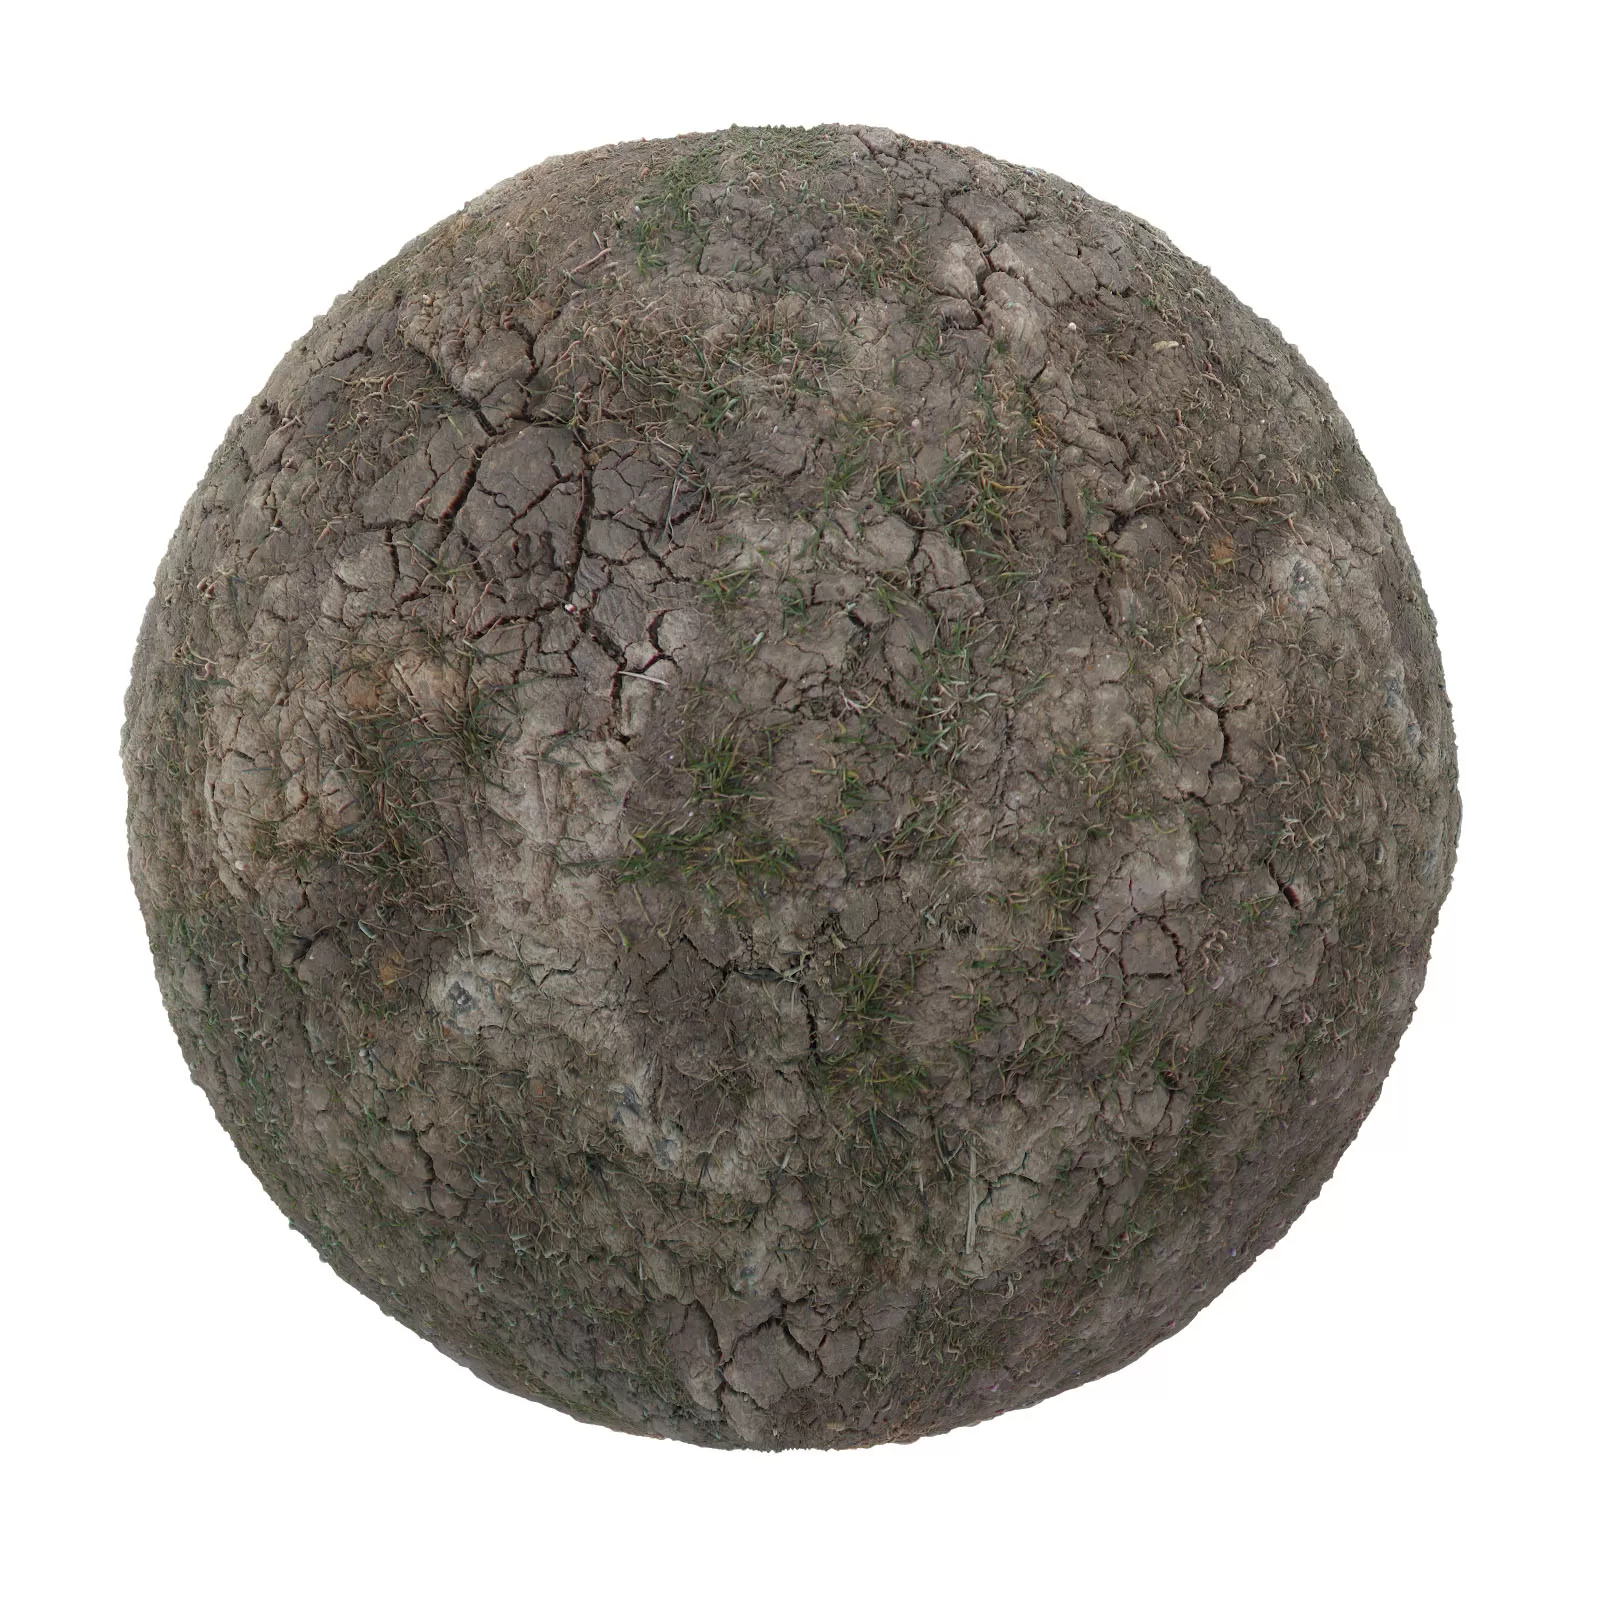 PBR CGAXIS TEXTURES – SOIL – Dry Cracked Dirt With Grass